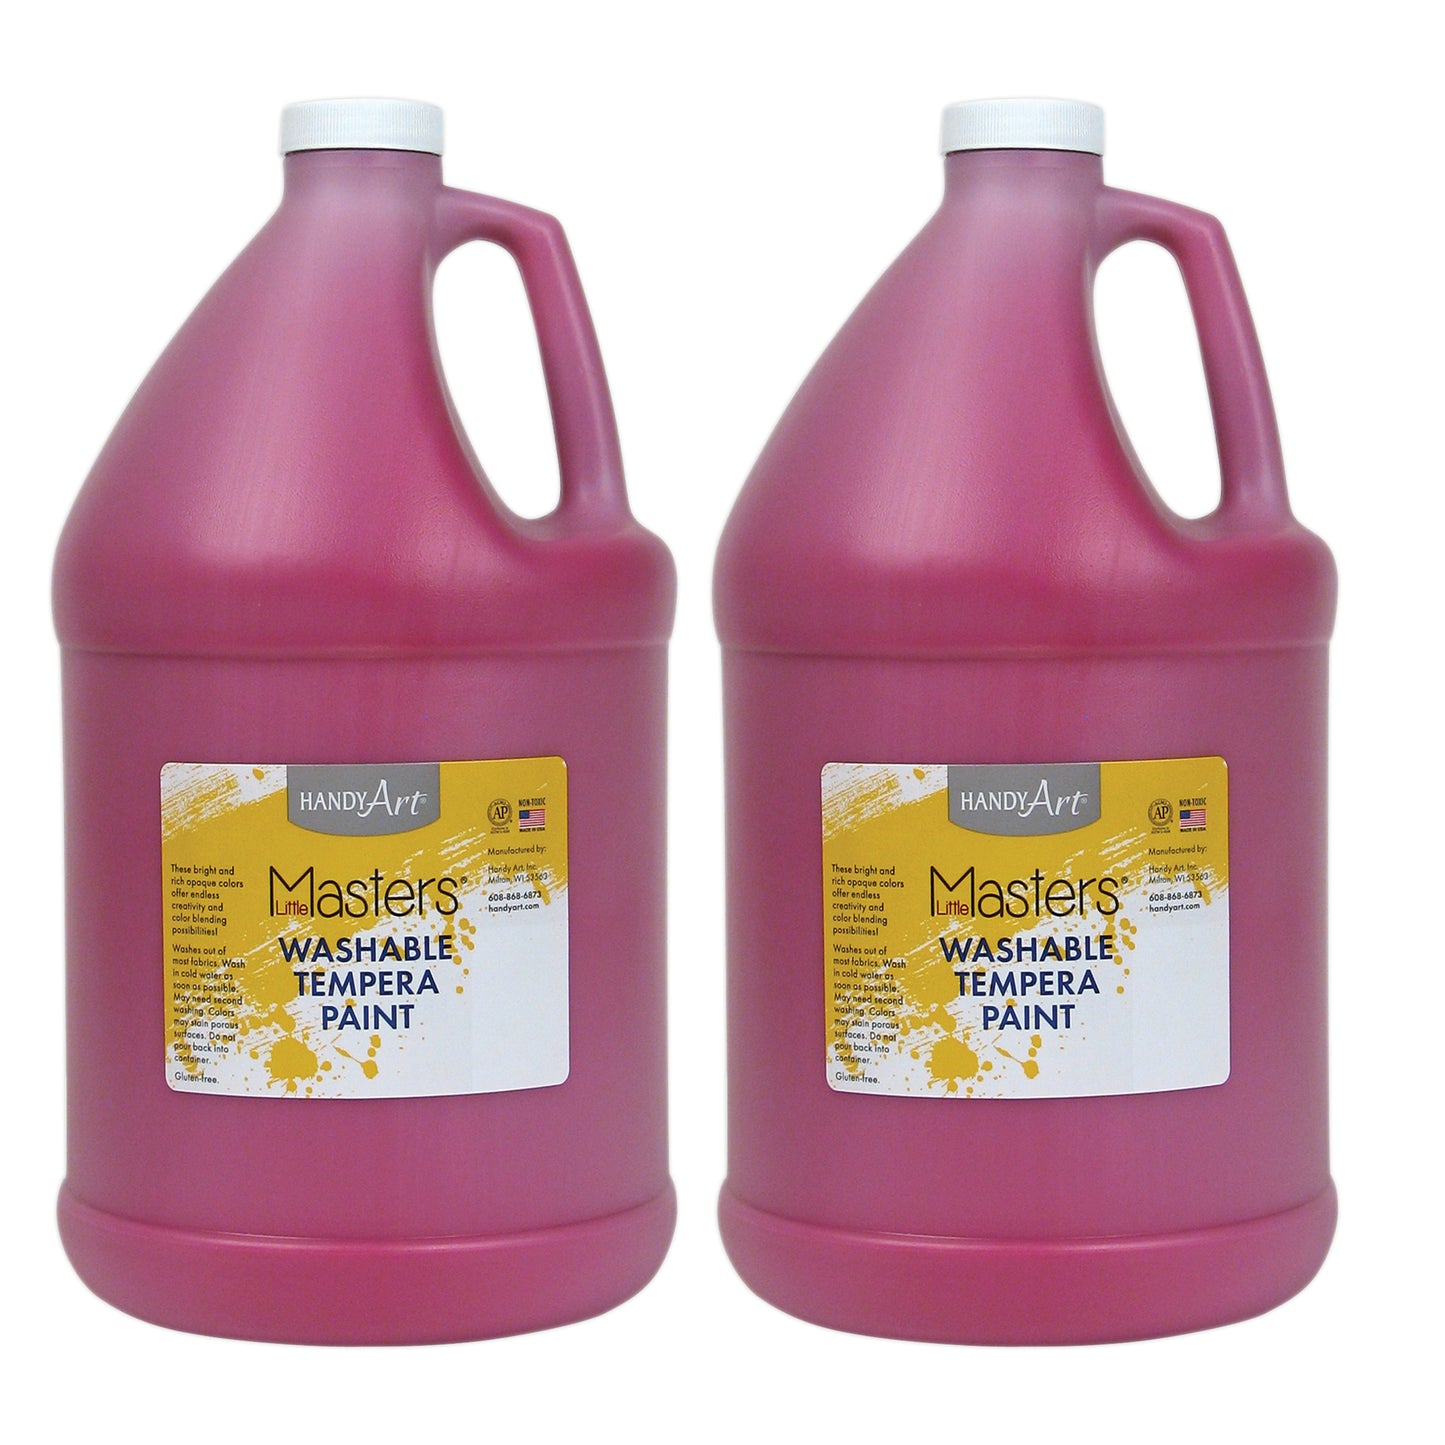 Little Masters® Washable Tempera Paint, Magenta, Gallon, Pack of 2